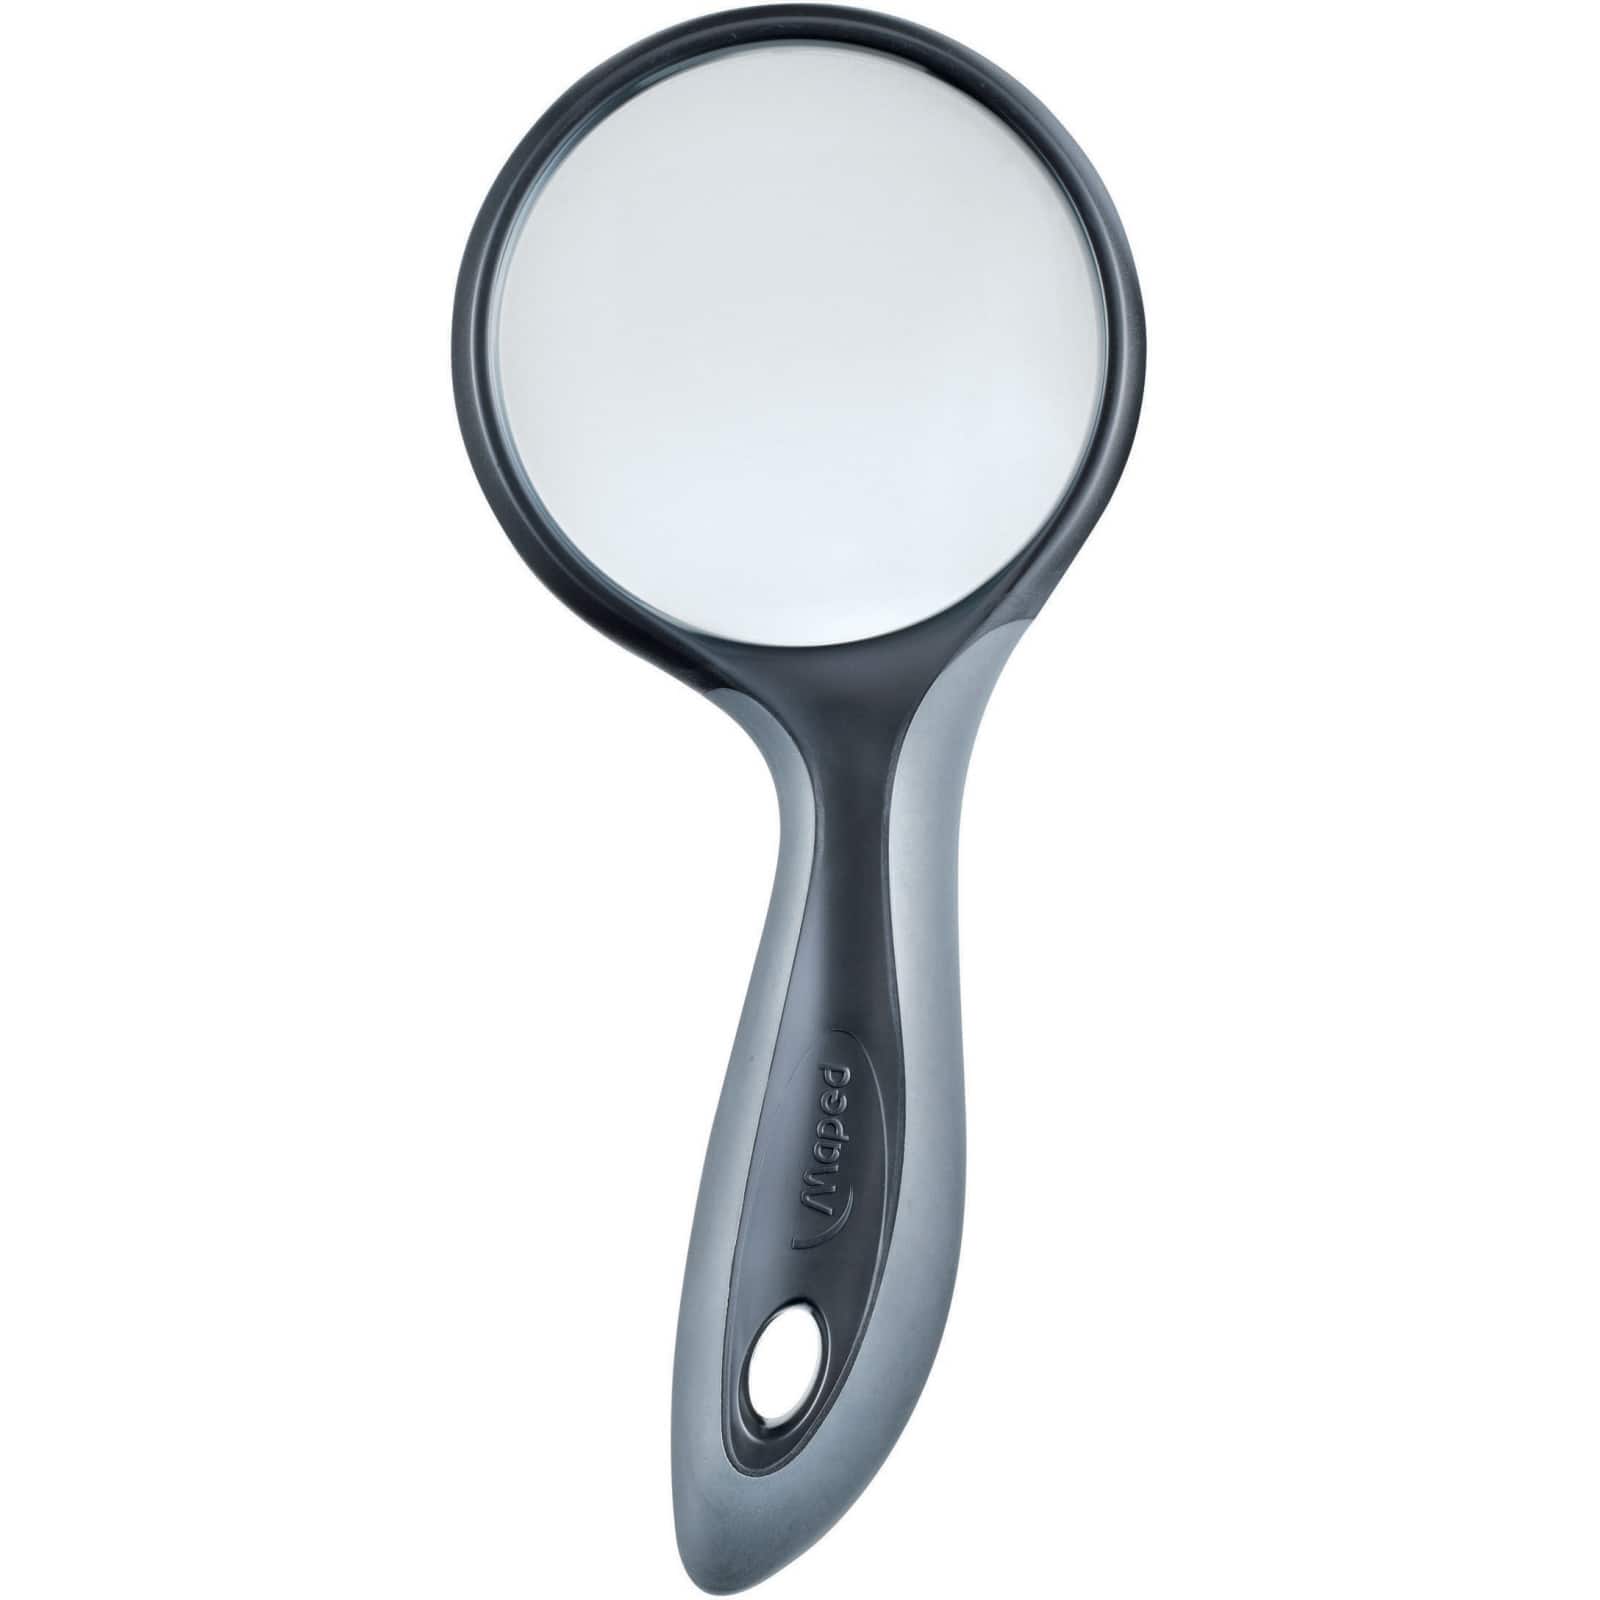 Magnifying Glass Uses: More Than Meets the Eye